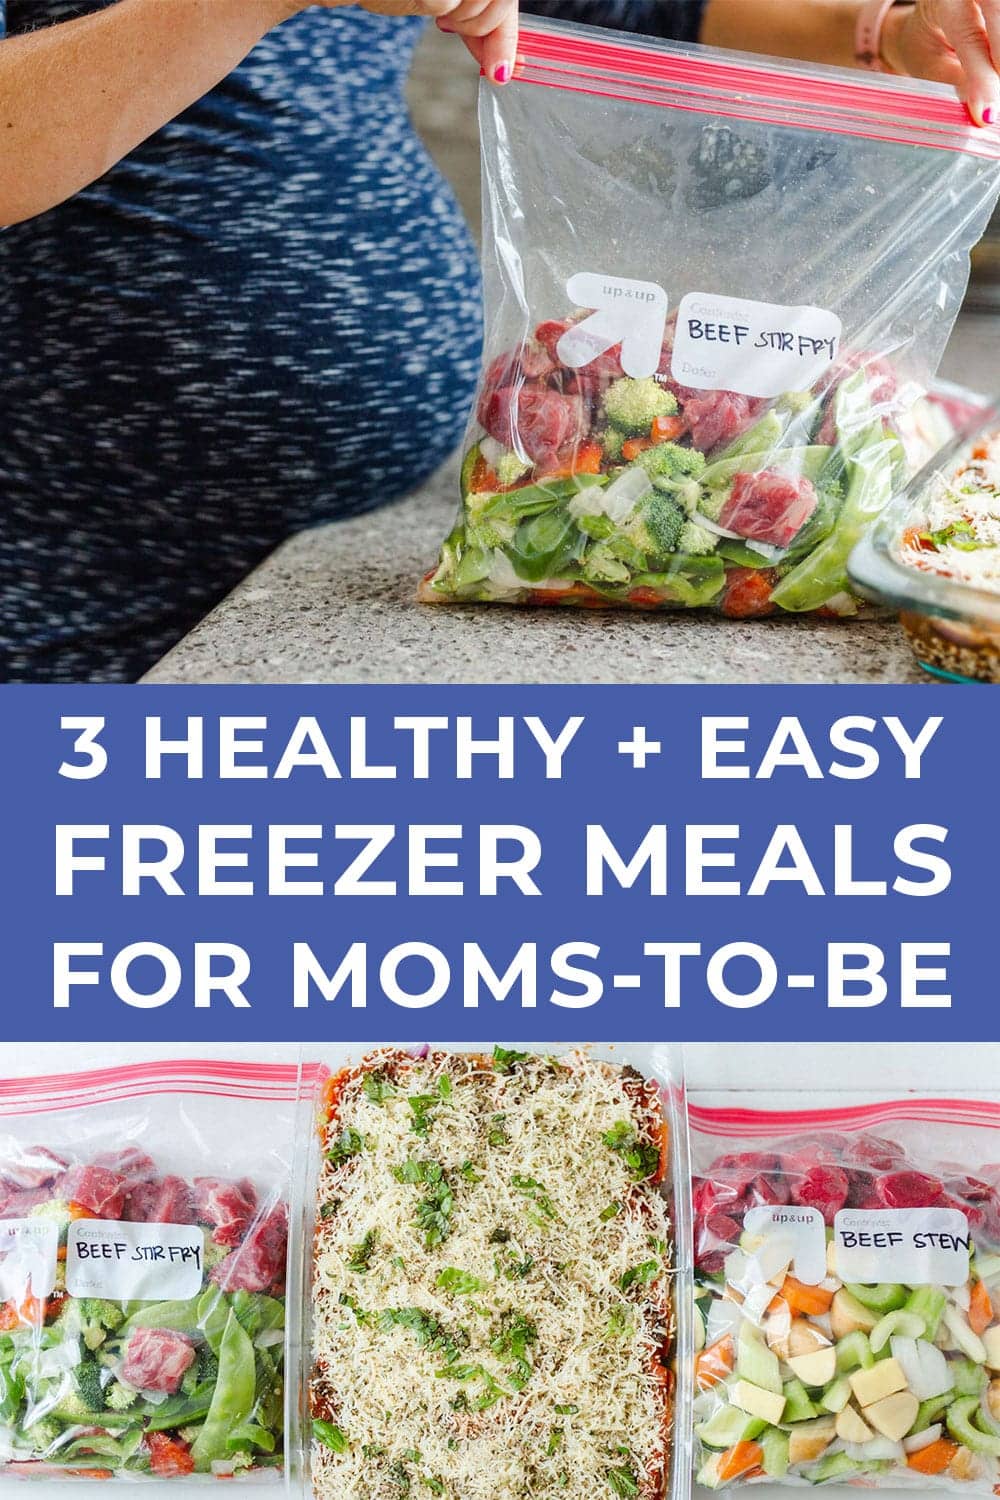 Easy Freezer Meals: 3 Dinners to Stock Your Freezer | Nourish Move Love